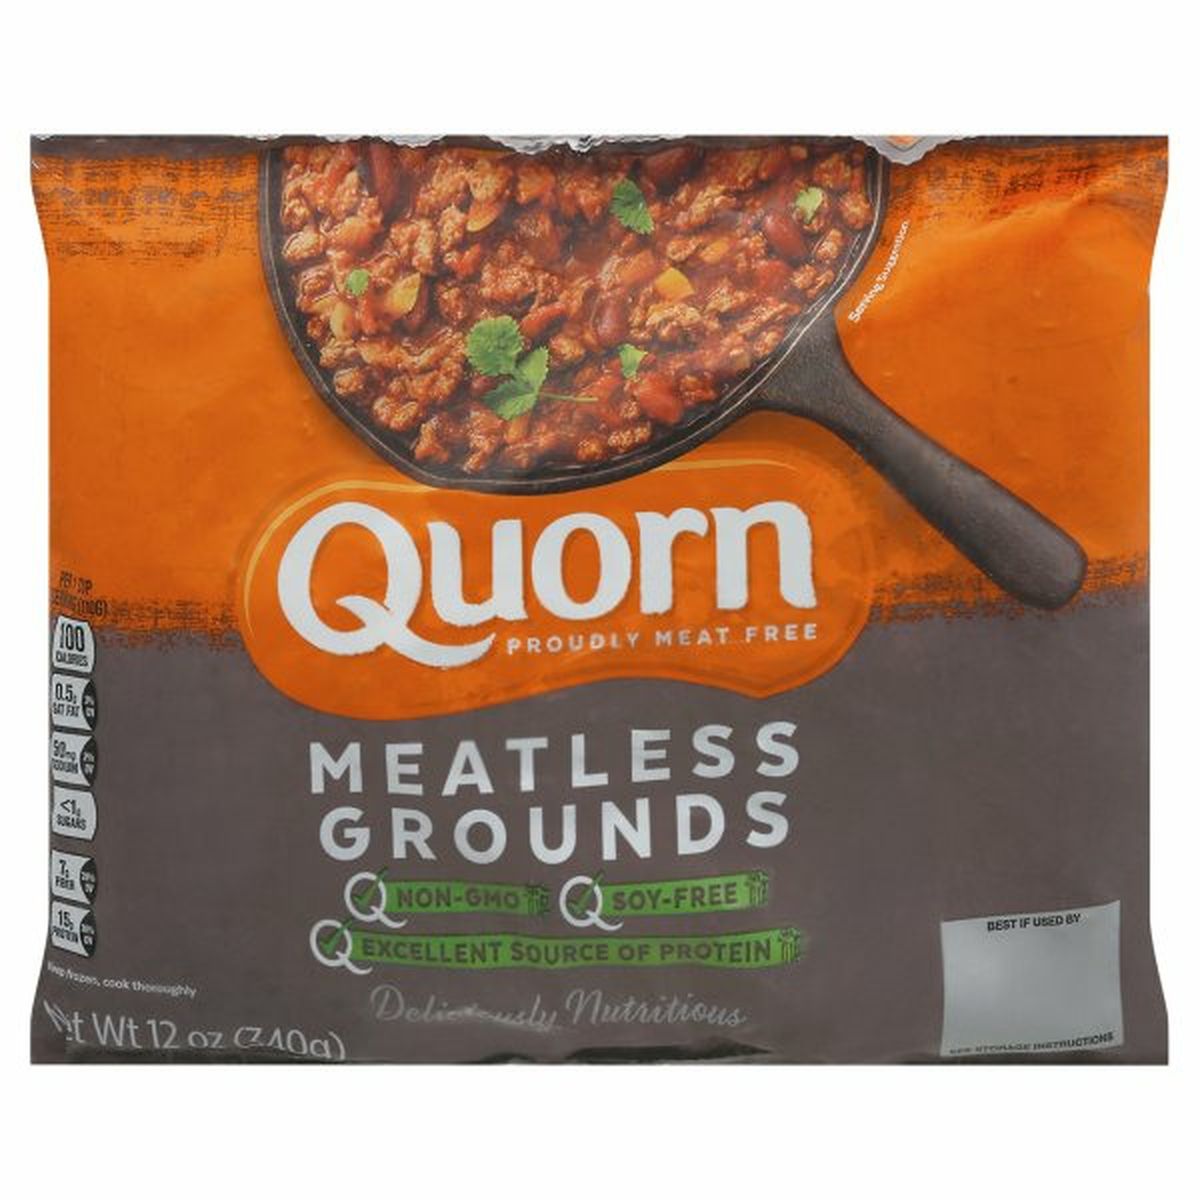 Calories in Quorn Meatless Grounds